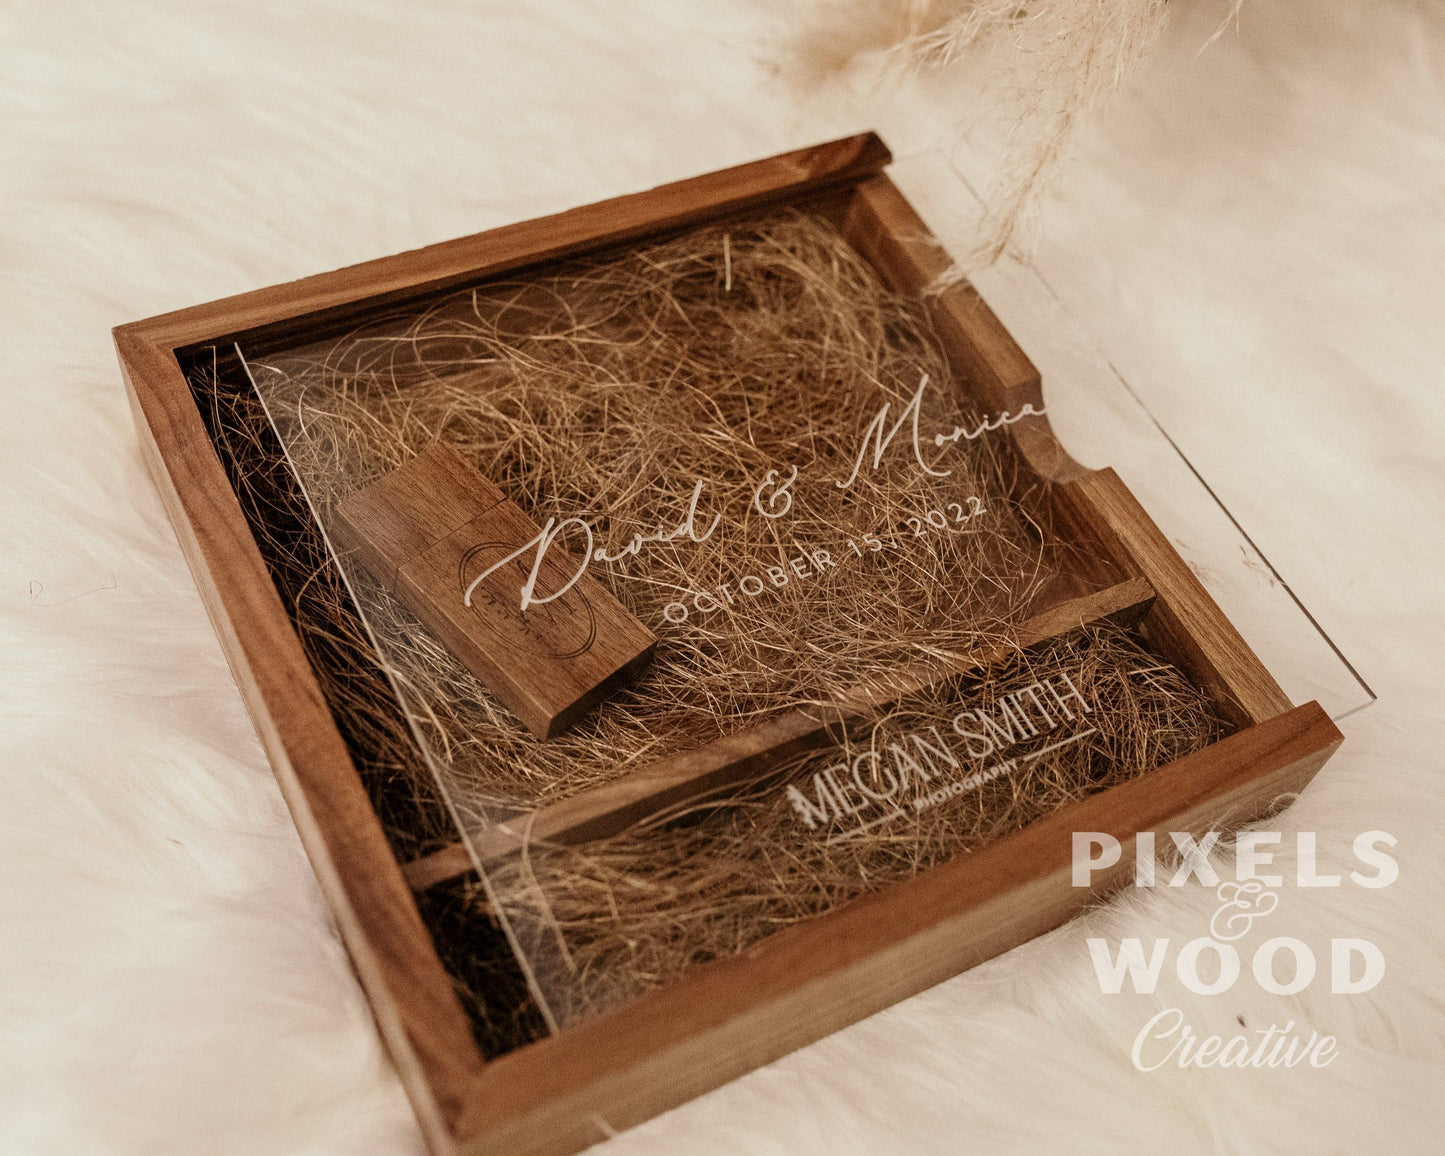 Wood and Acrylic Photographer Gift Box with Custom Engraving and 32GB USB Drive